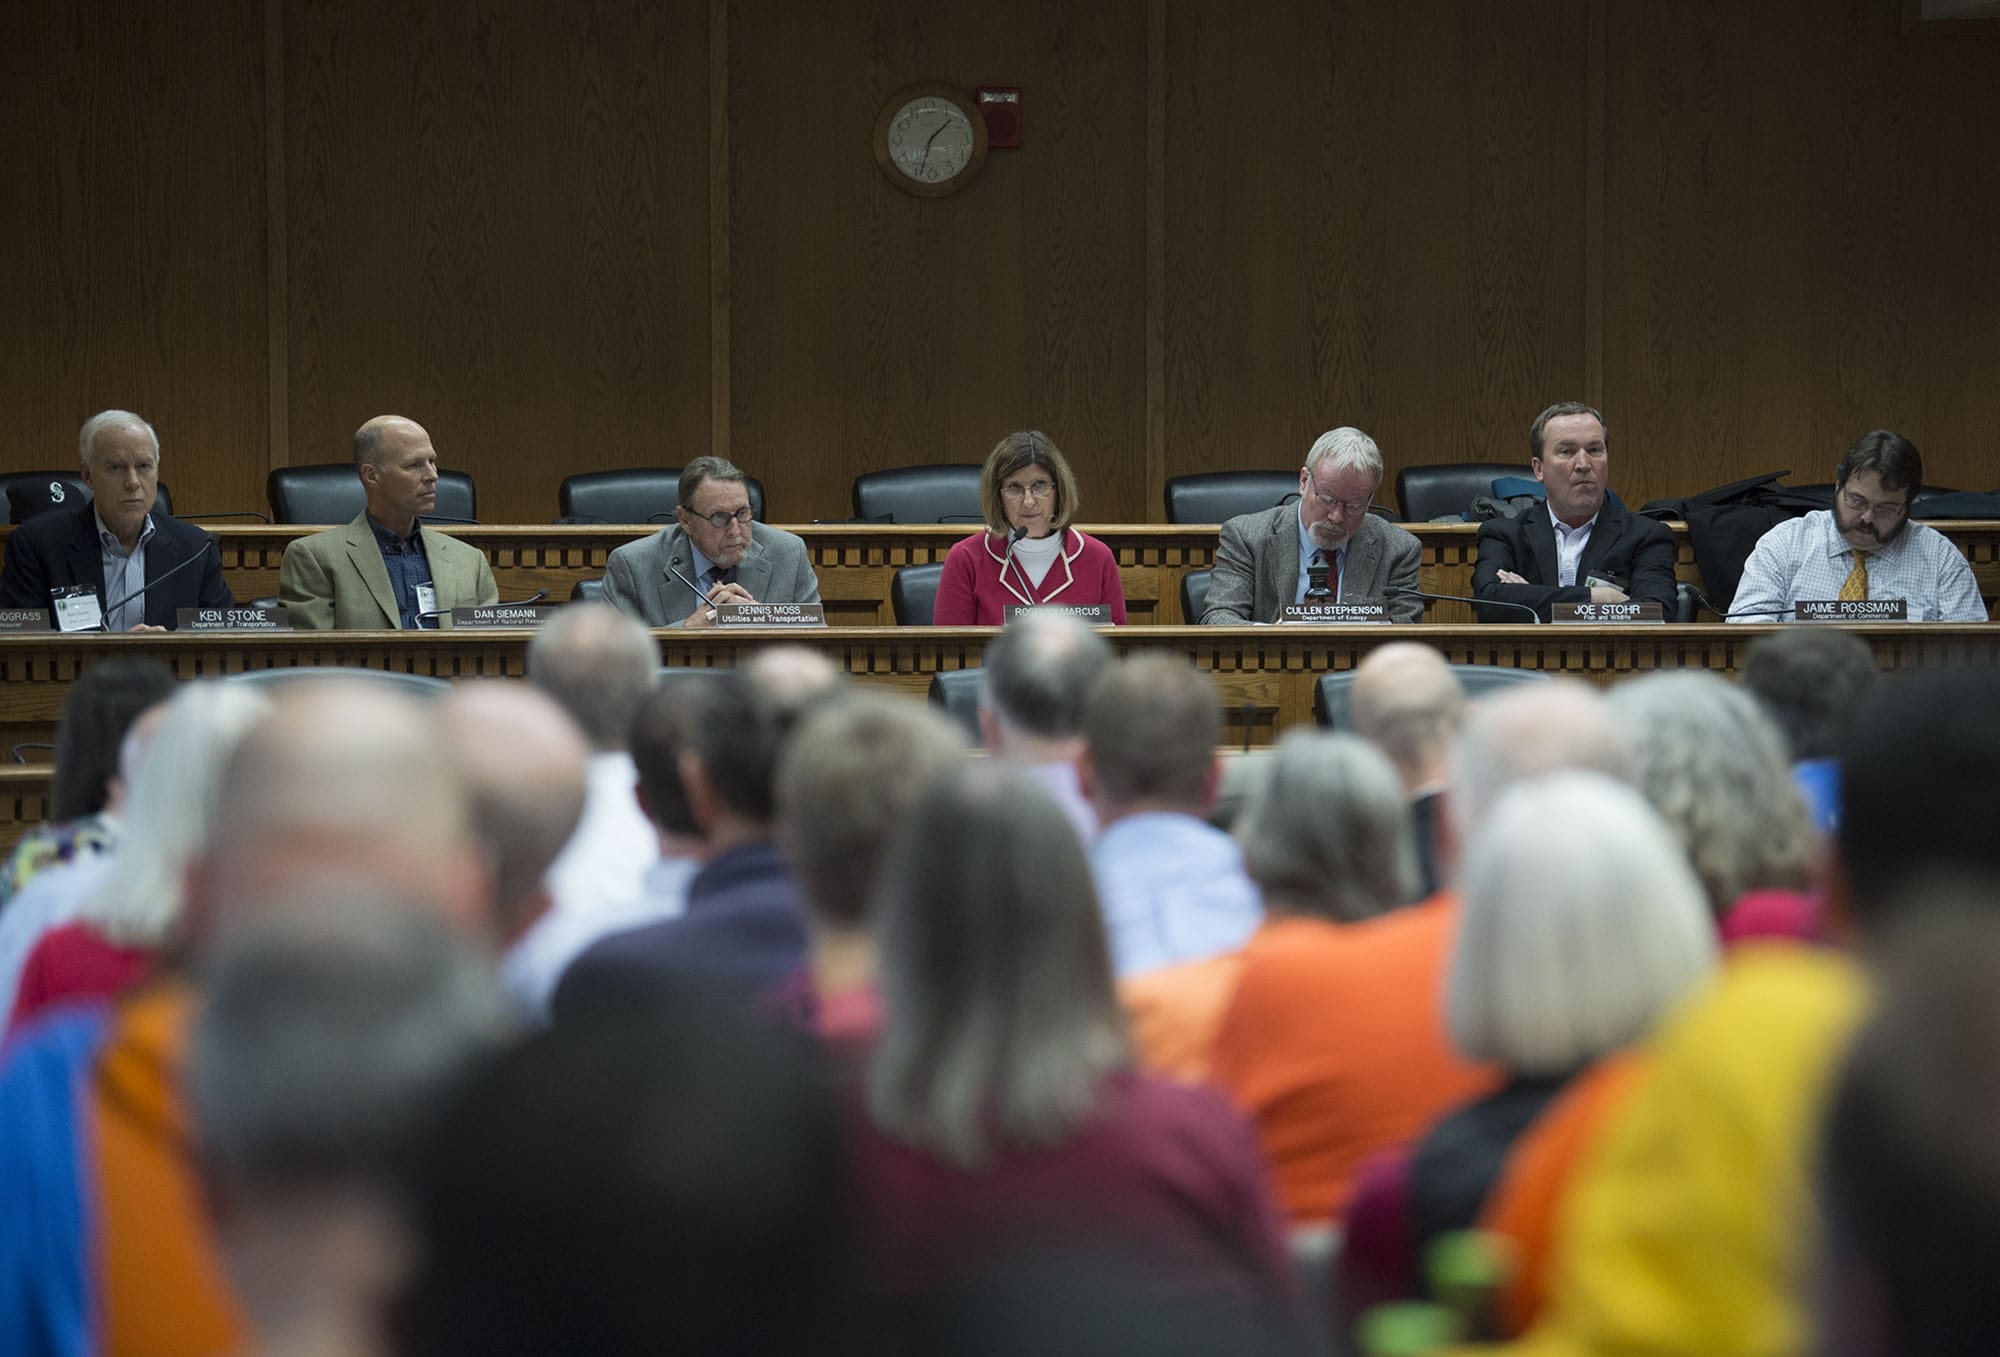 EFSEC chair Roselyn Marcus, center in pink, leads the meeting about the Port of Vancouver oil terminal at the John A. Cherberg Building in Olympia on Tuesday afternoon, Nov. 28, 2017.